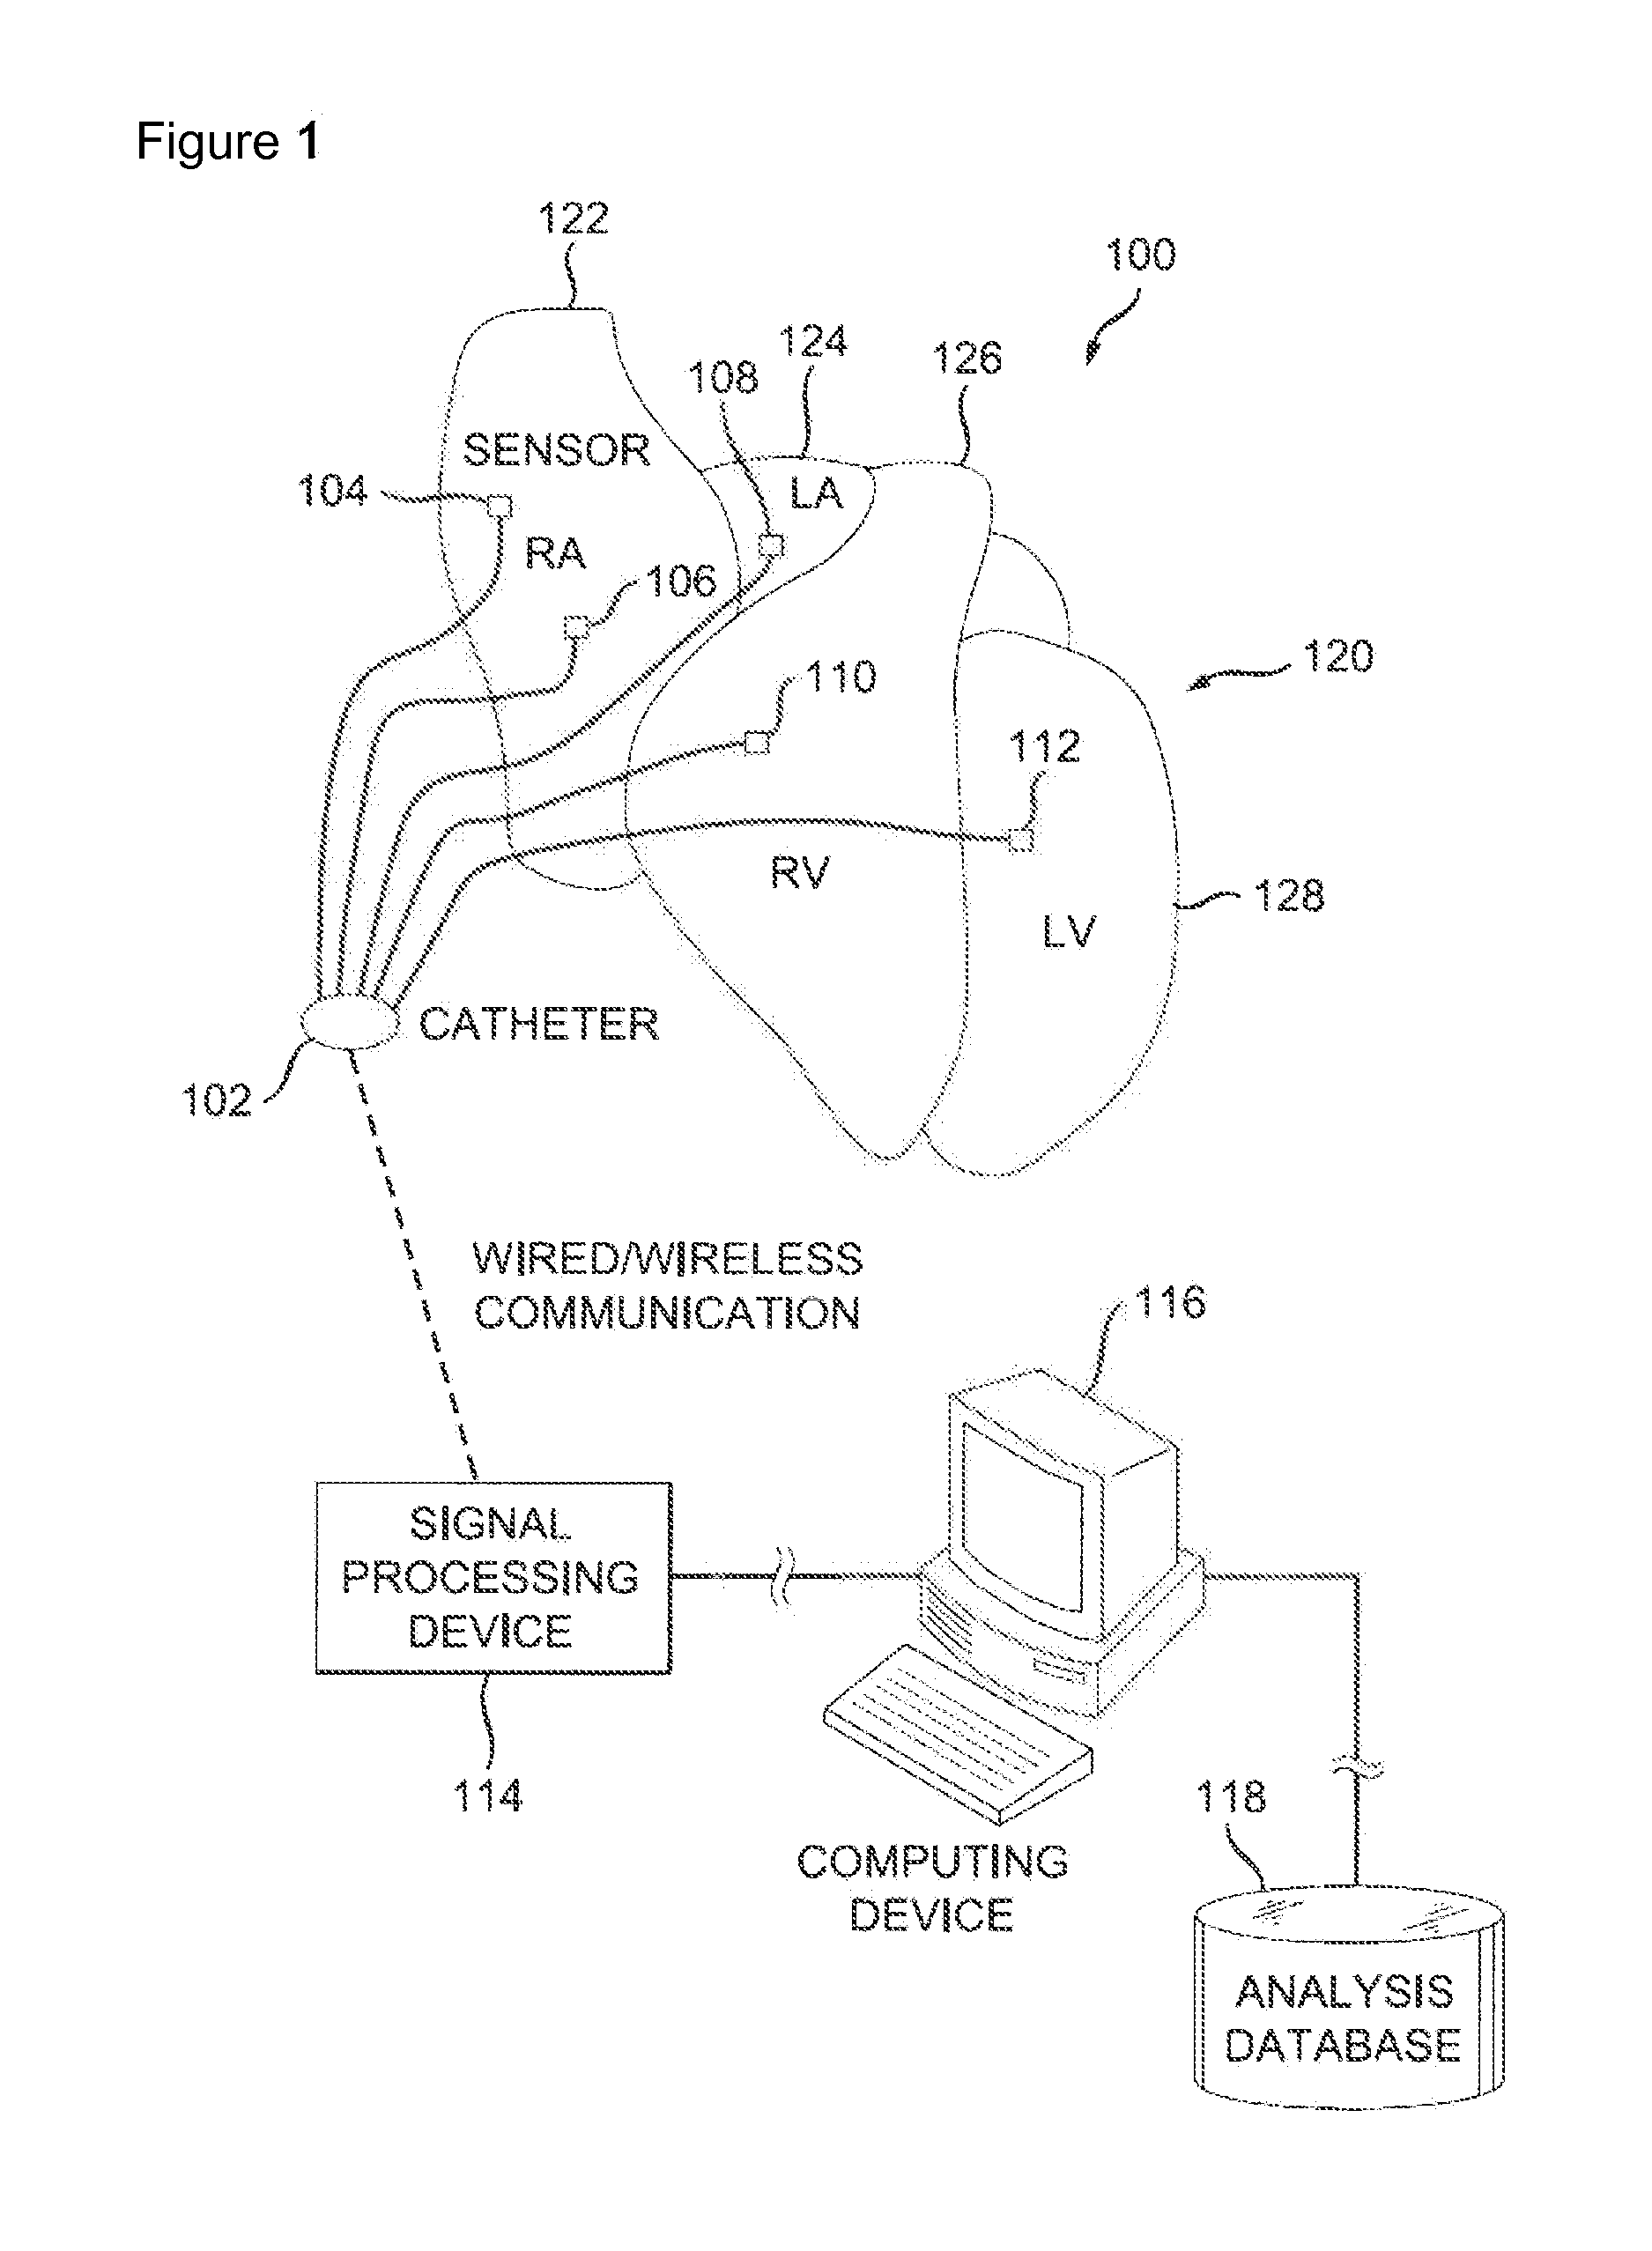 System and method of identifying sources for biological rhythms